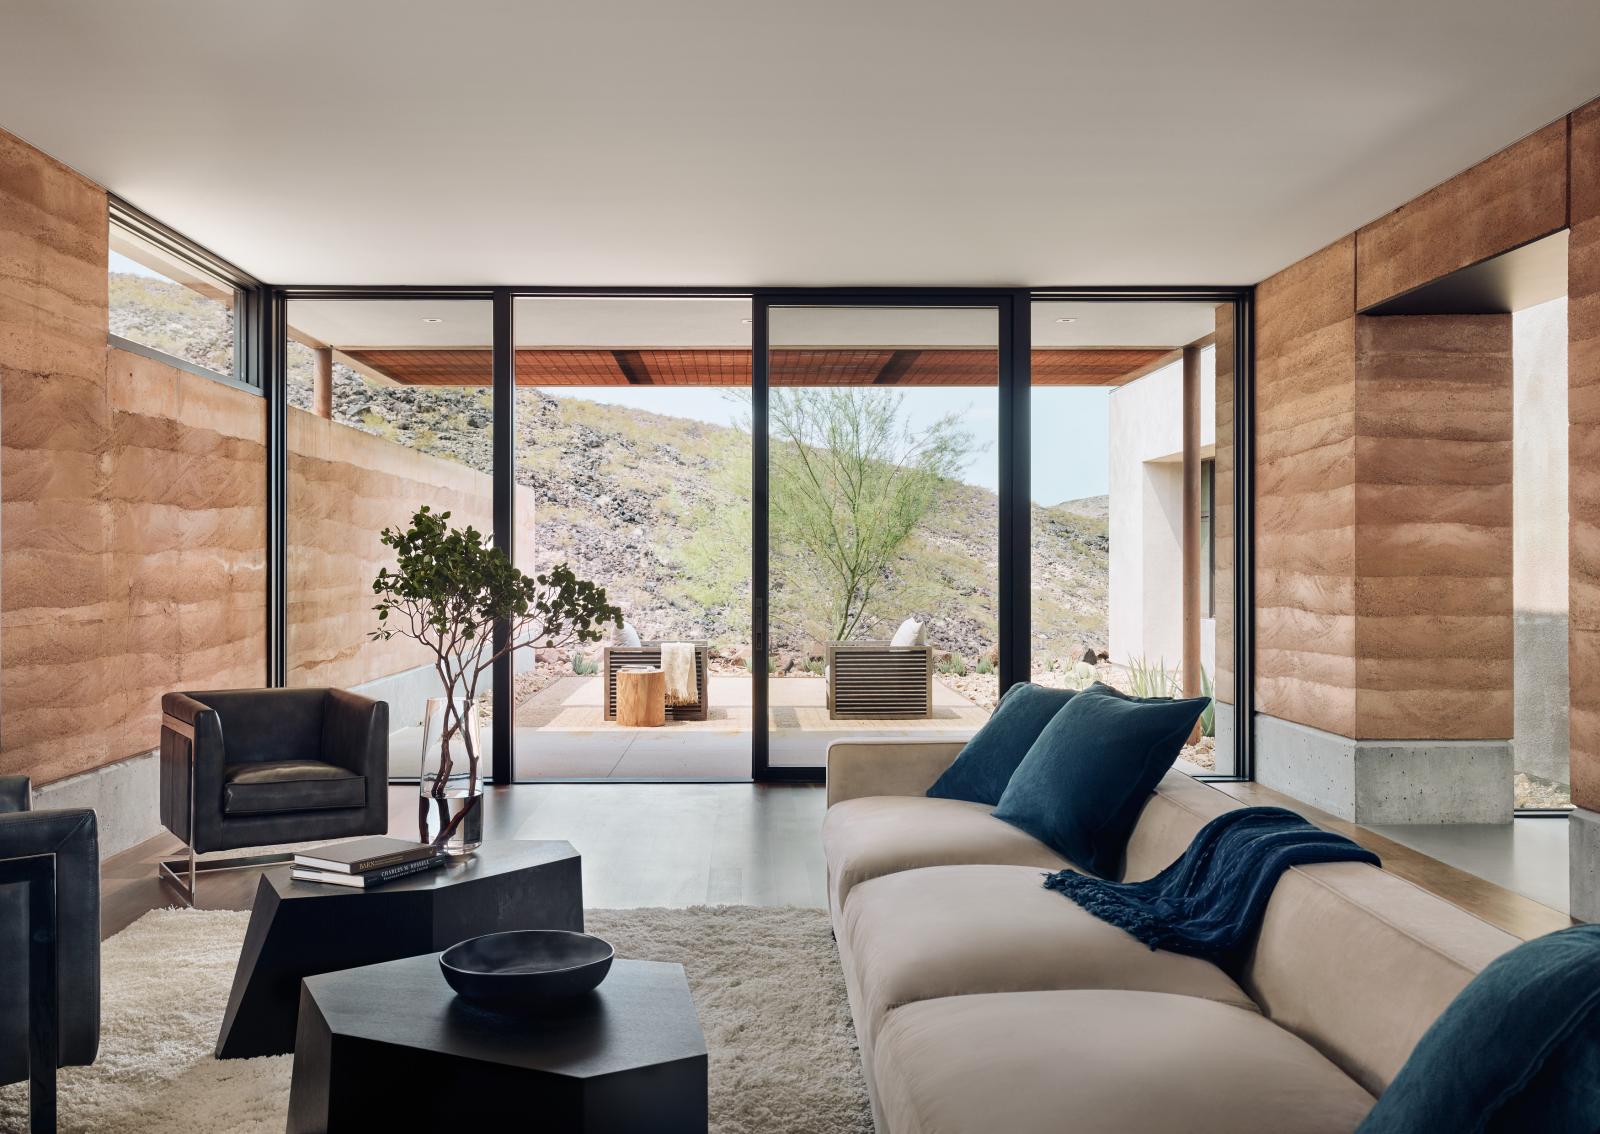 The rammed earth textures, colors and materials blend seamlessly with the surrounding desert.